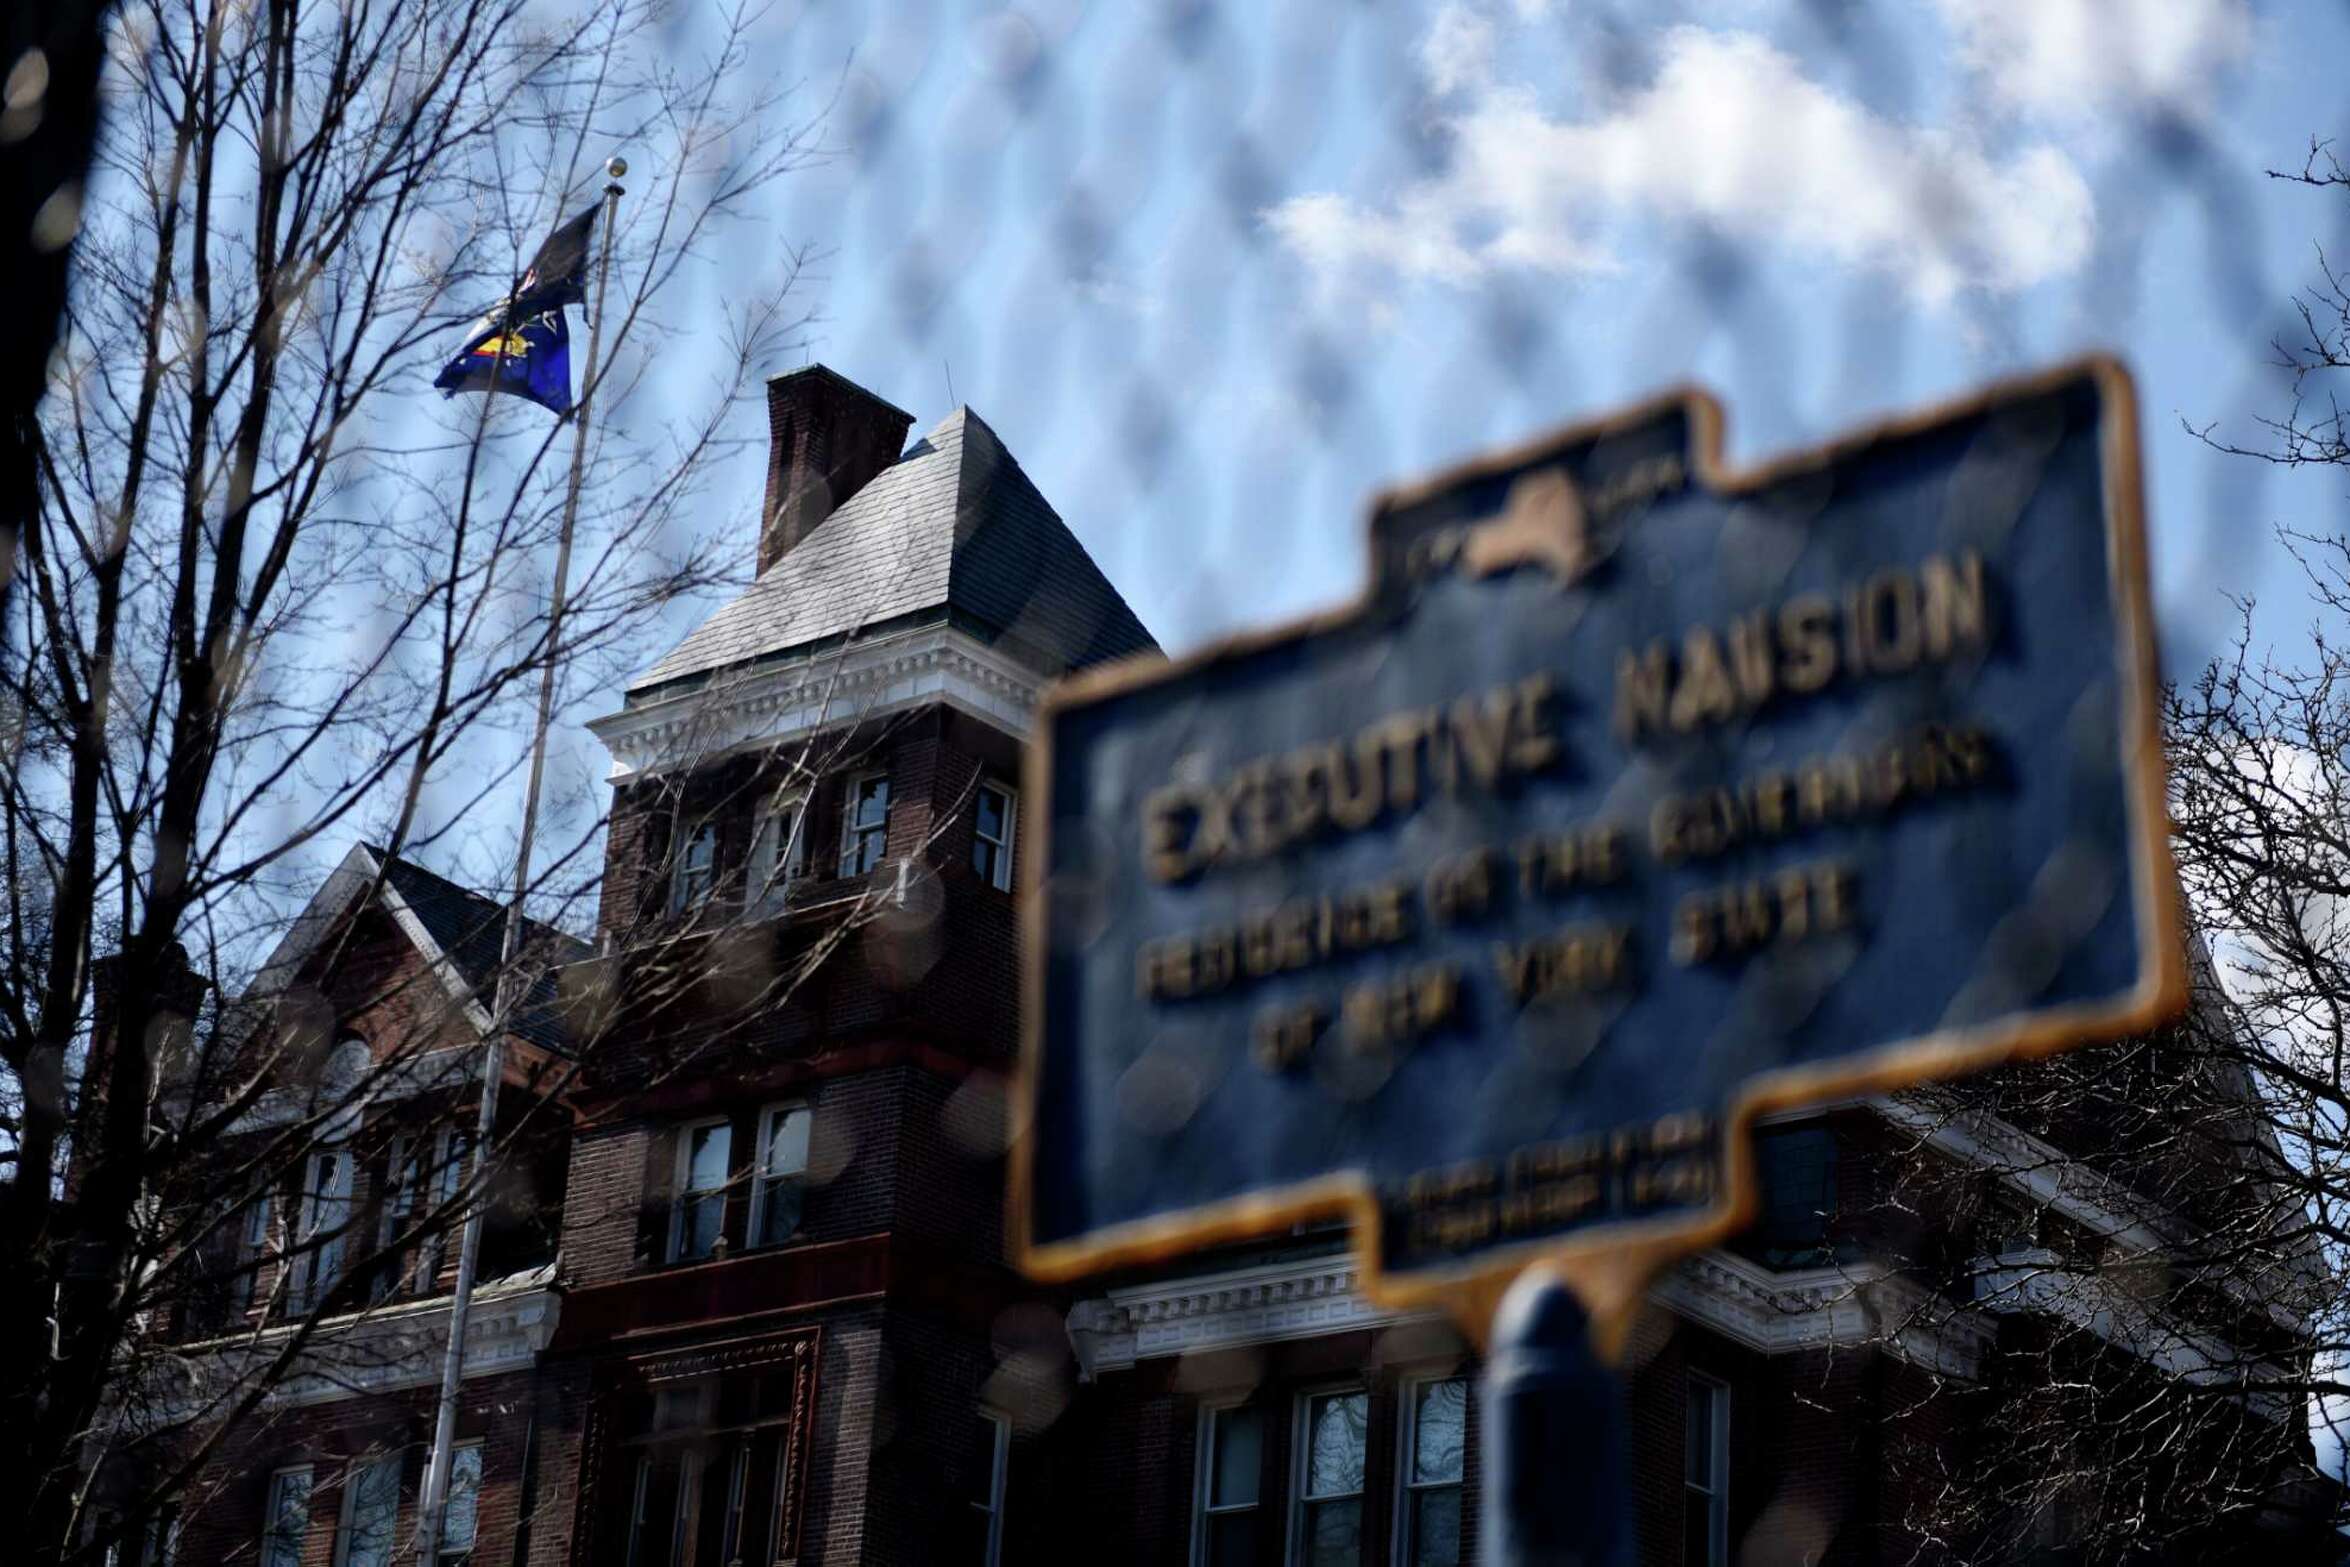 The New York State Executive Mansion is viewed through a fence on Tuesday, March 9, 2021, on Eagle Street in Albany, N.Y. (Will Waldron/Times Union)